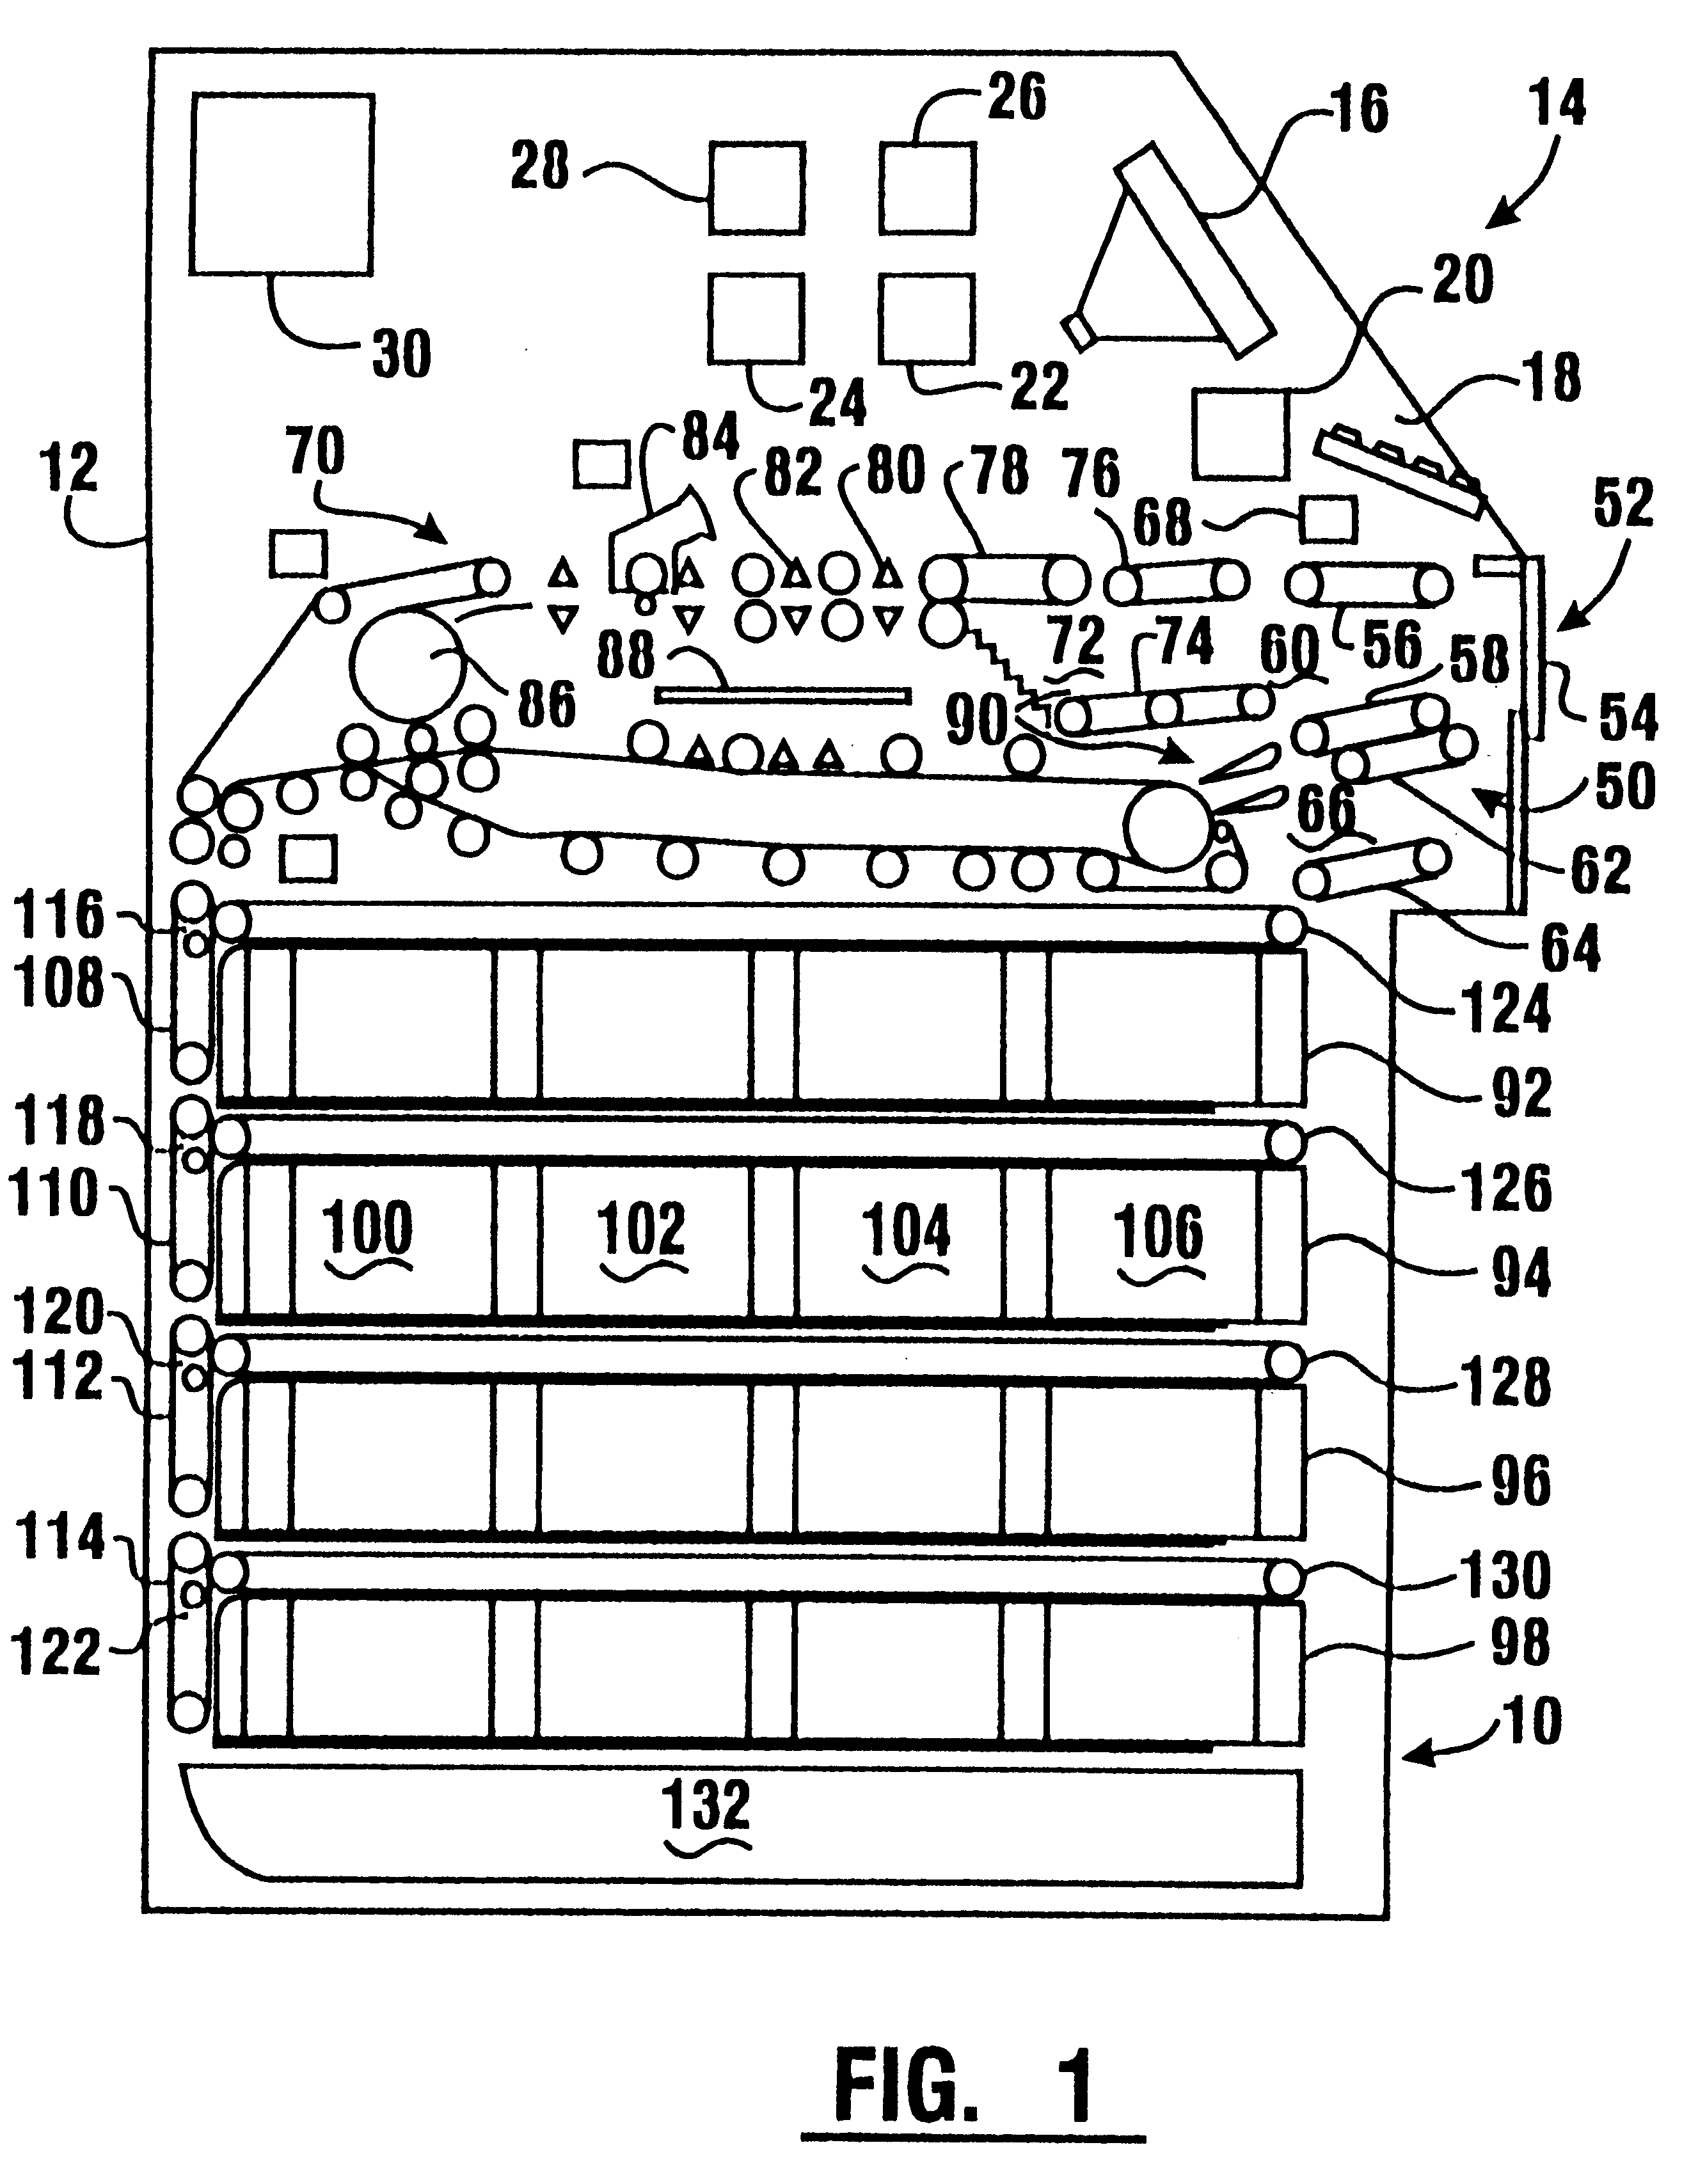 Method for operating automated banking machine